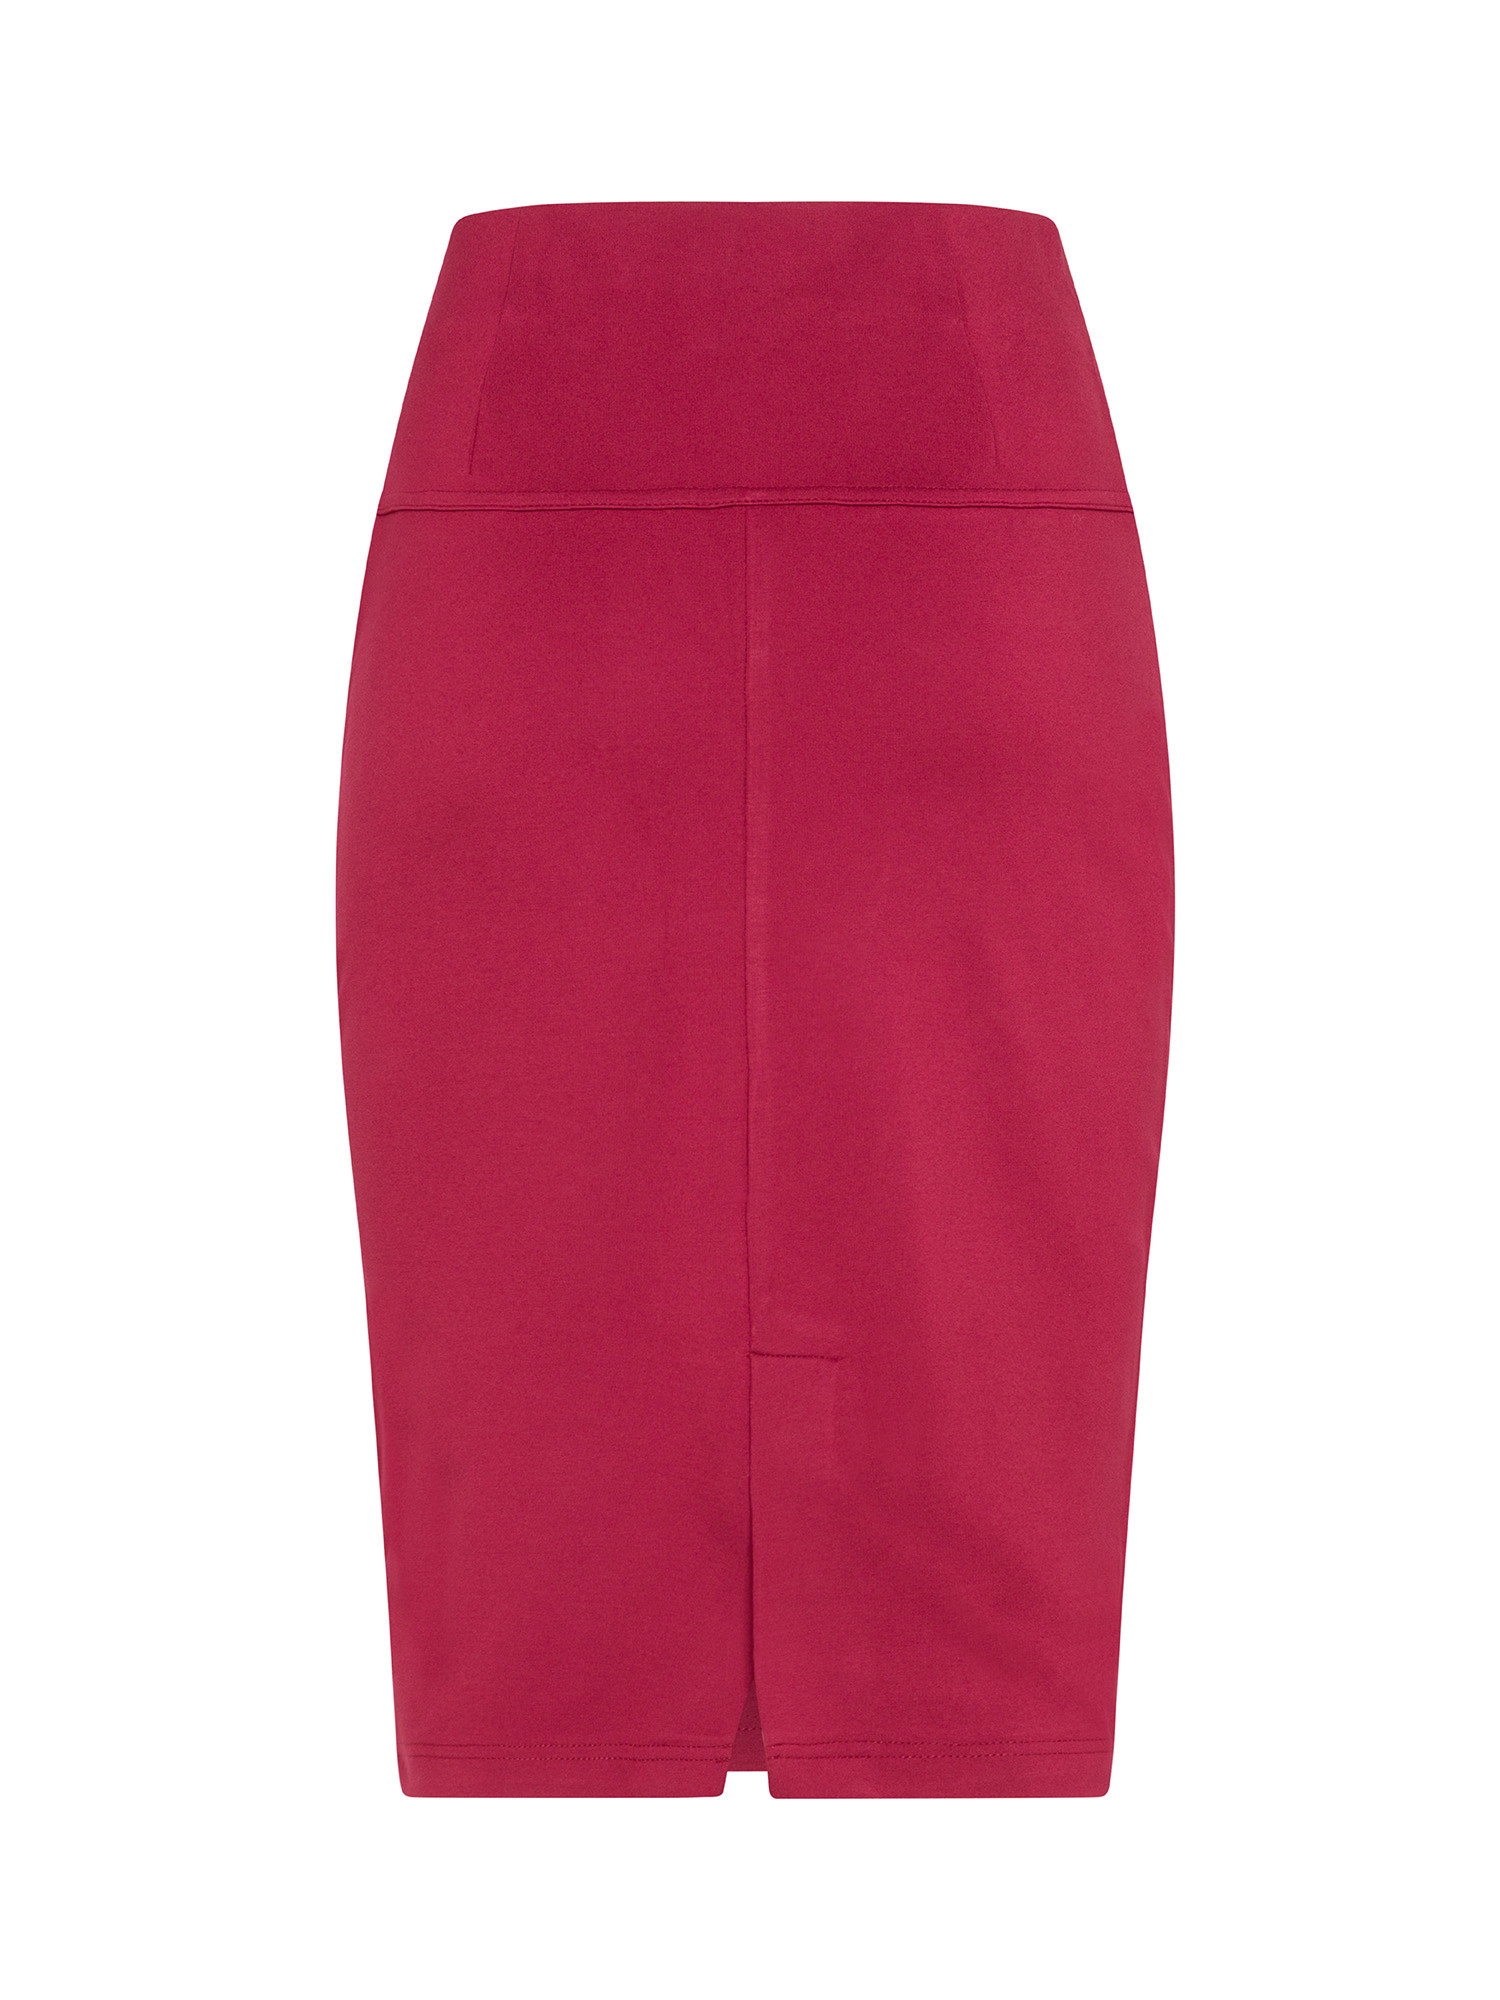 High waist skirt, Red, large image number 1